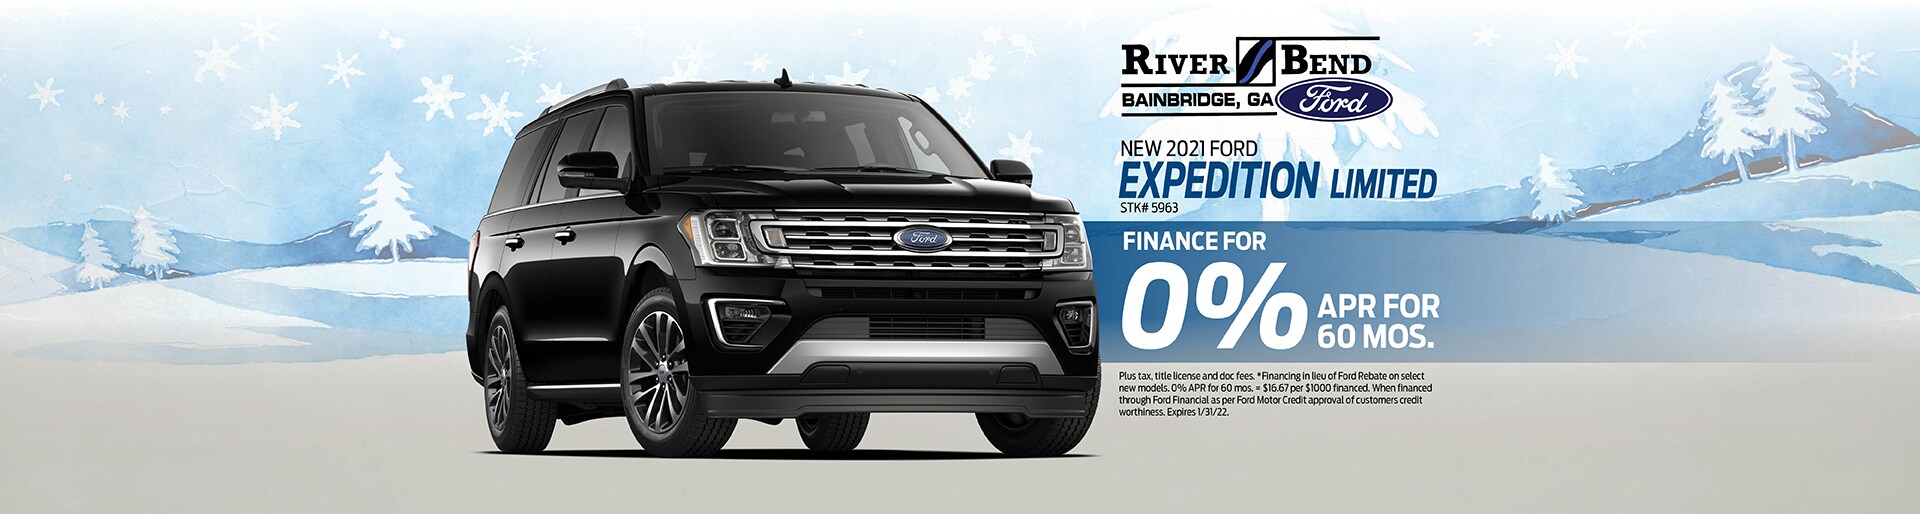 Finance a new 2021 Ford Expedition Limited for 0% APR for 60 months